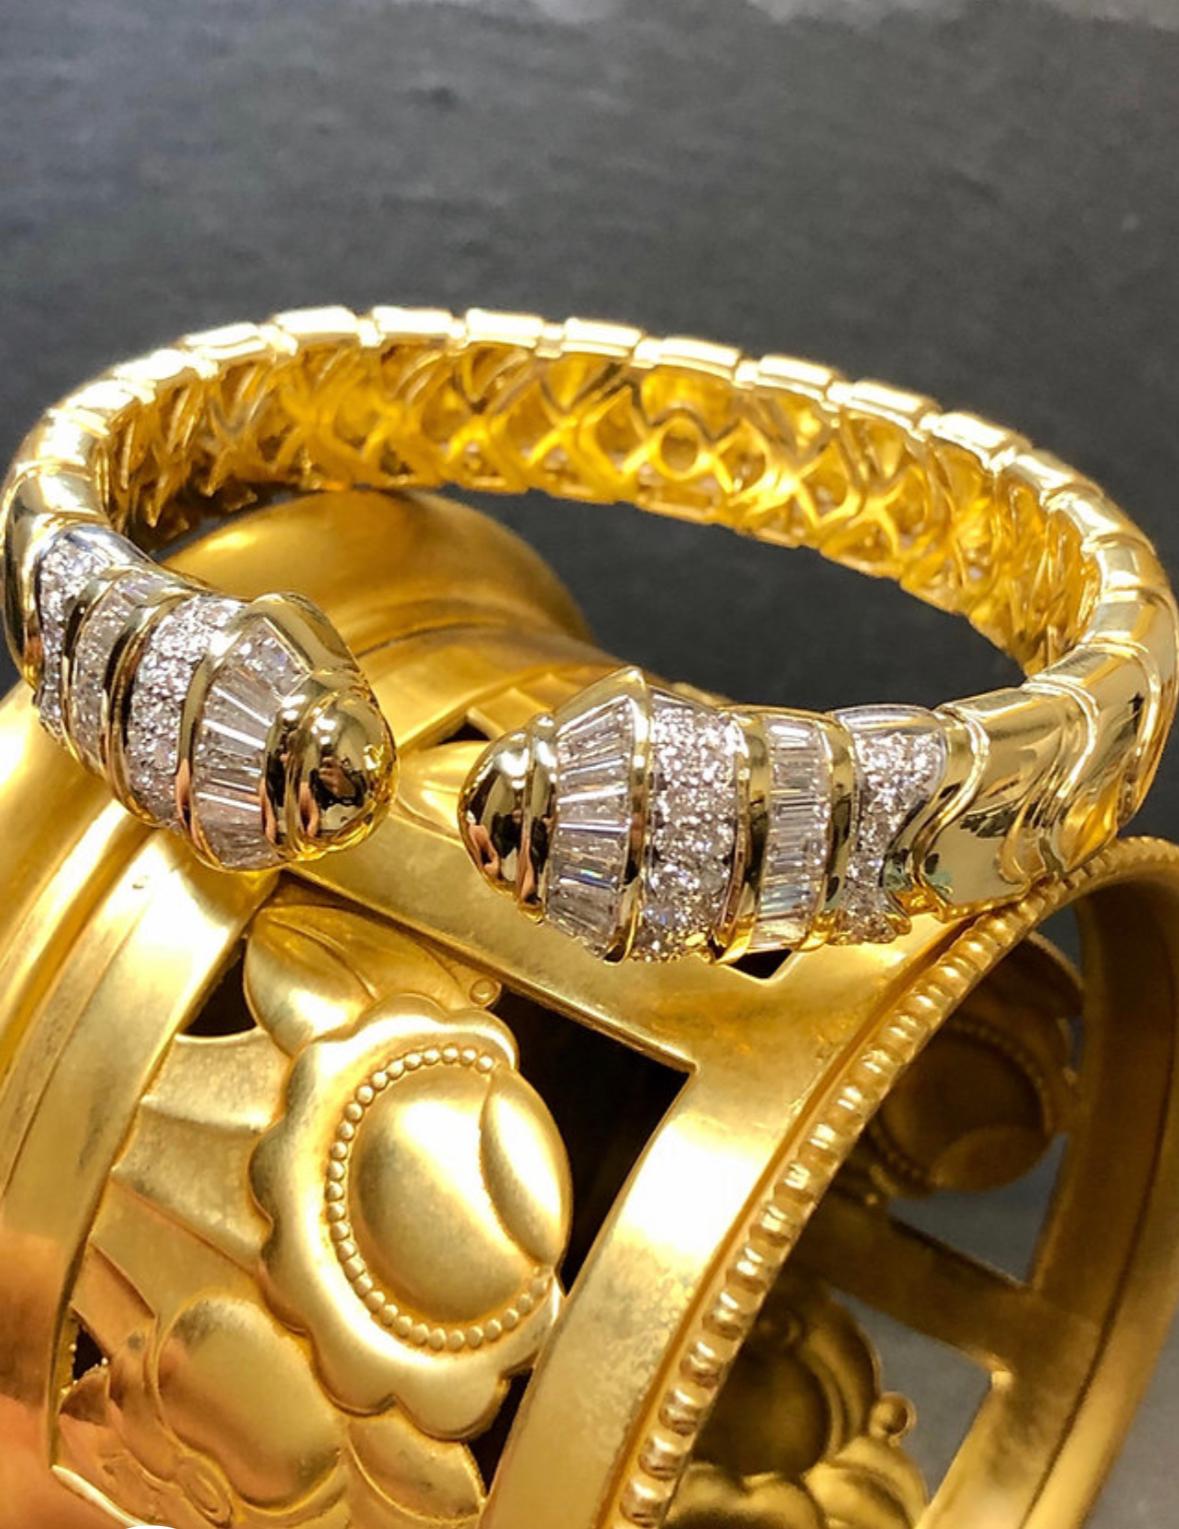 A heavy and very well made cuff bracelet done in 18K yellow gold and set with approximately 6cttw in G-H color Vs1-2 clarity baguette and round diamonds.
THIS IS ONLY FOR THE SALE OF (1) DIAMOND CUFF. ANOTHER IN SAPPHIRE AND DIAMOND IS ALSO